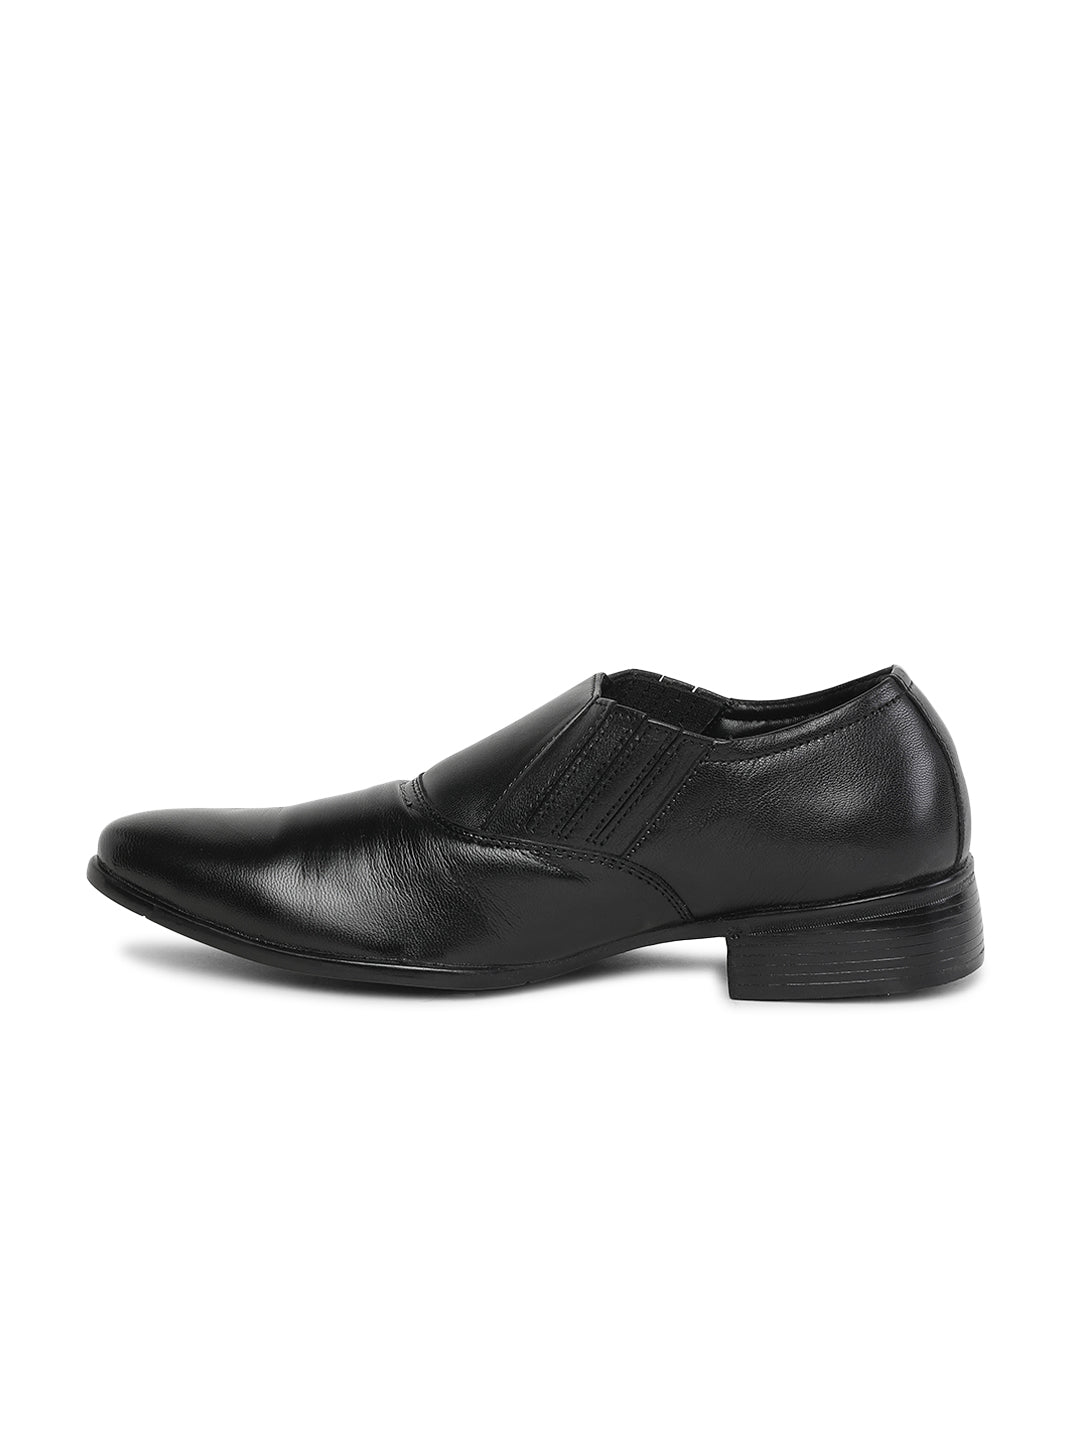 Paragon  R11215G Men Formal Shoes | Corporate Office Shoes | Smart &amp; Sleek Design | Comfortable Sole with Cushioning | For Daily &amp; Occasion Wear